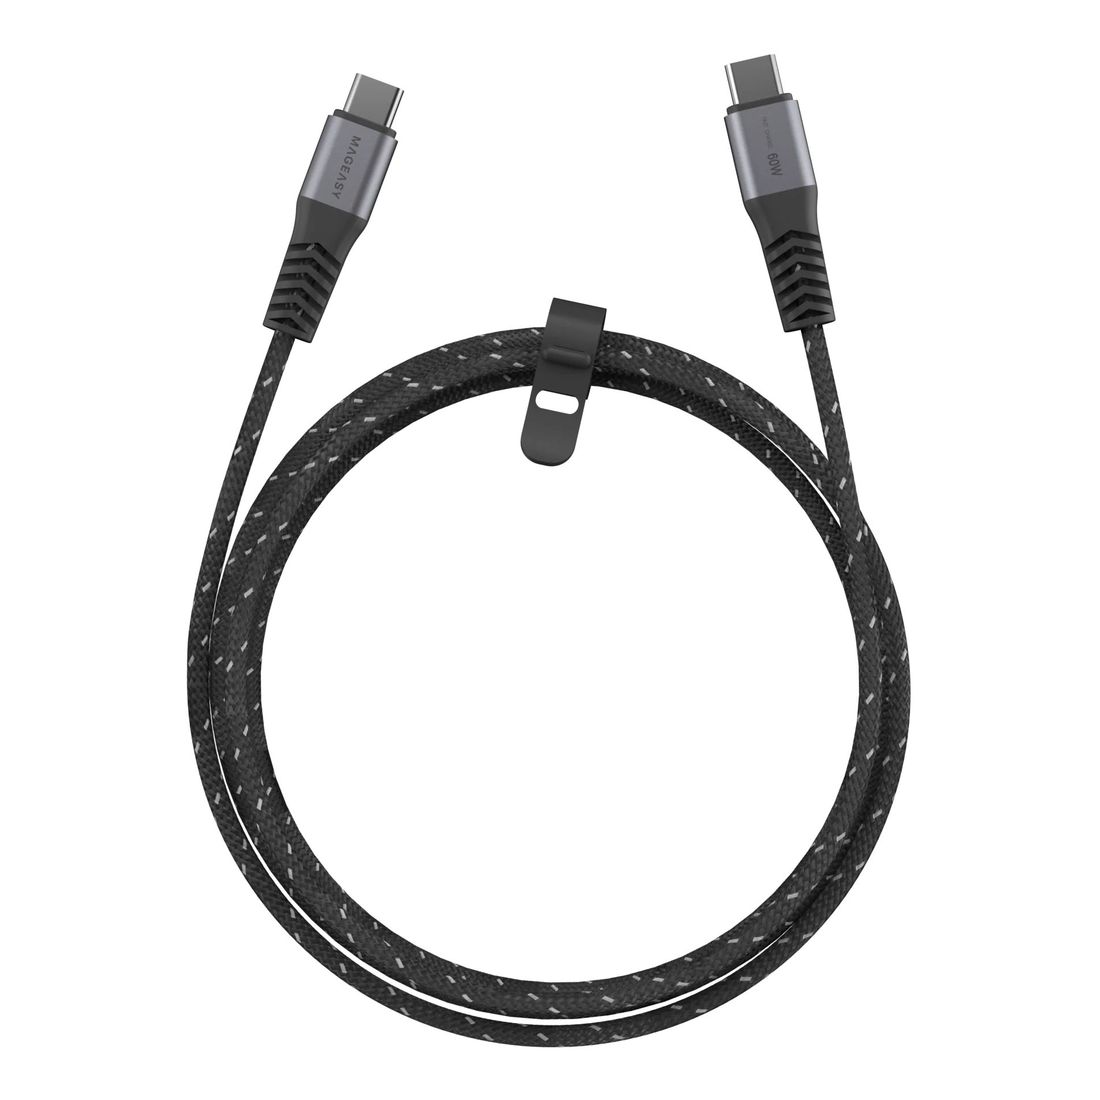 Switcheasy Linkline USB-C to USB-C Charging/Sync Cable 1.5m - Black